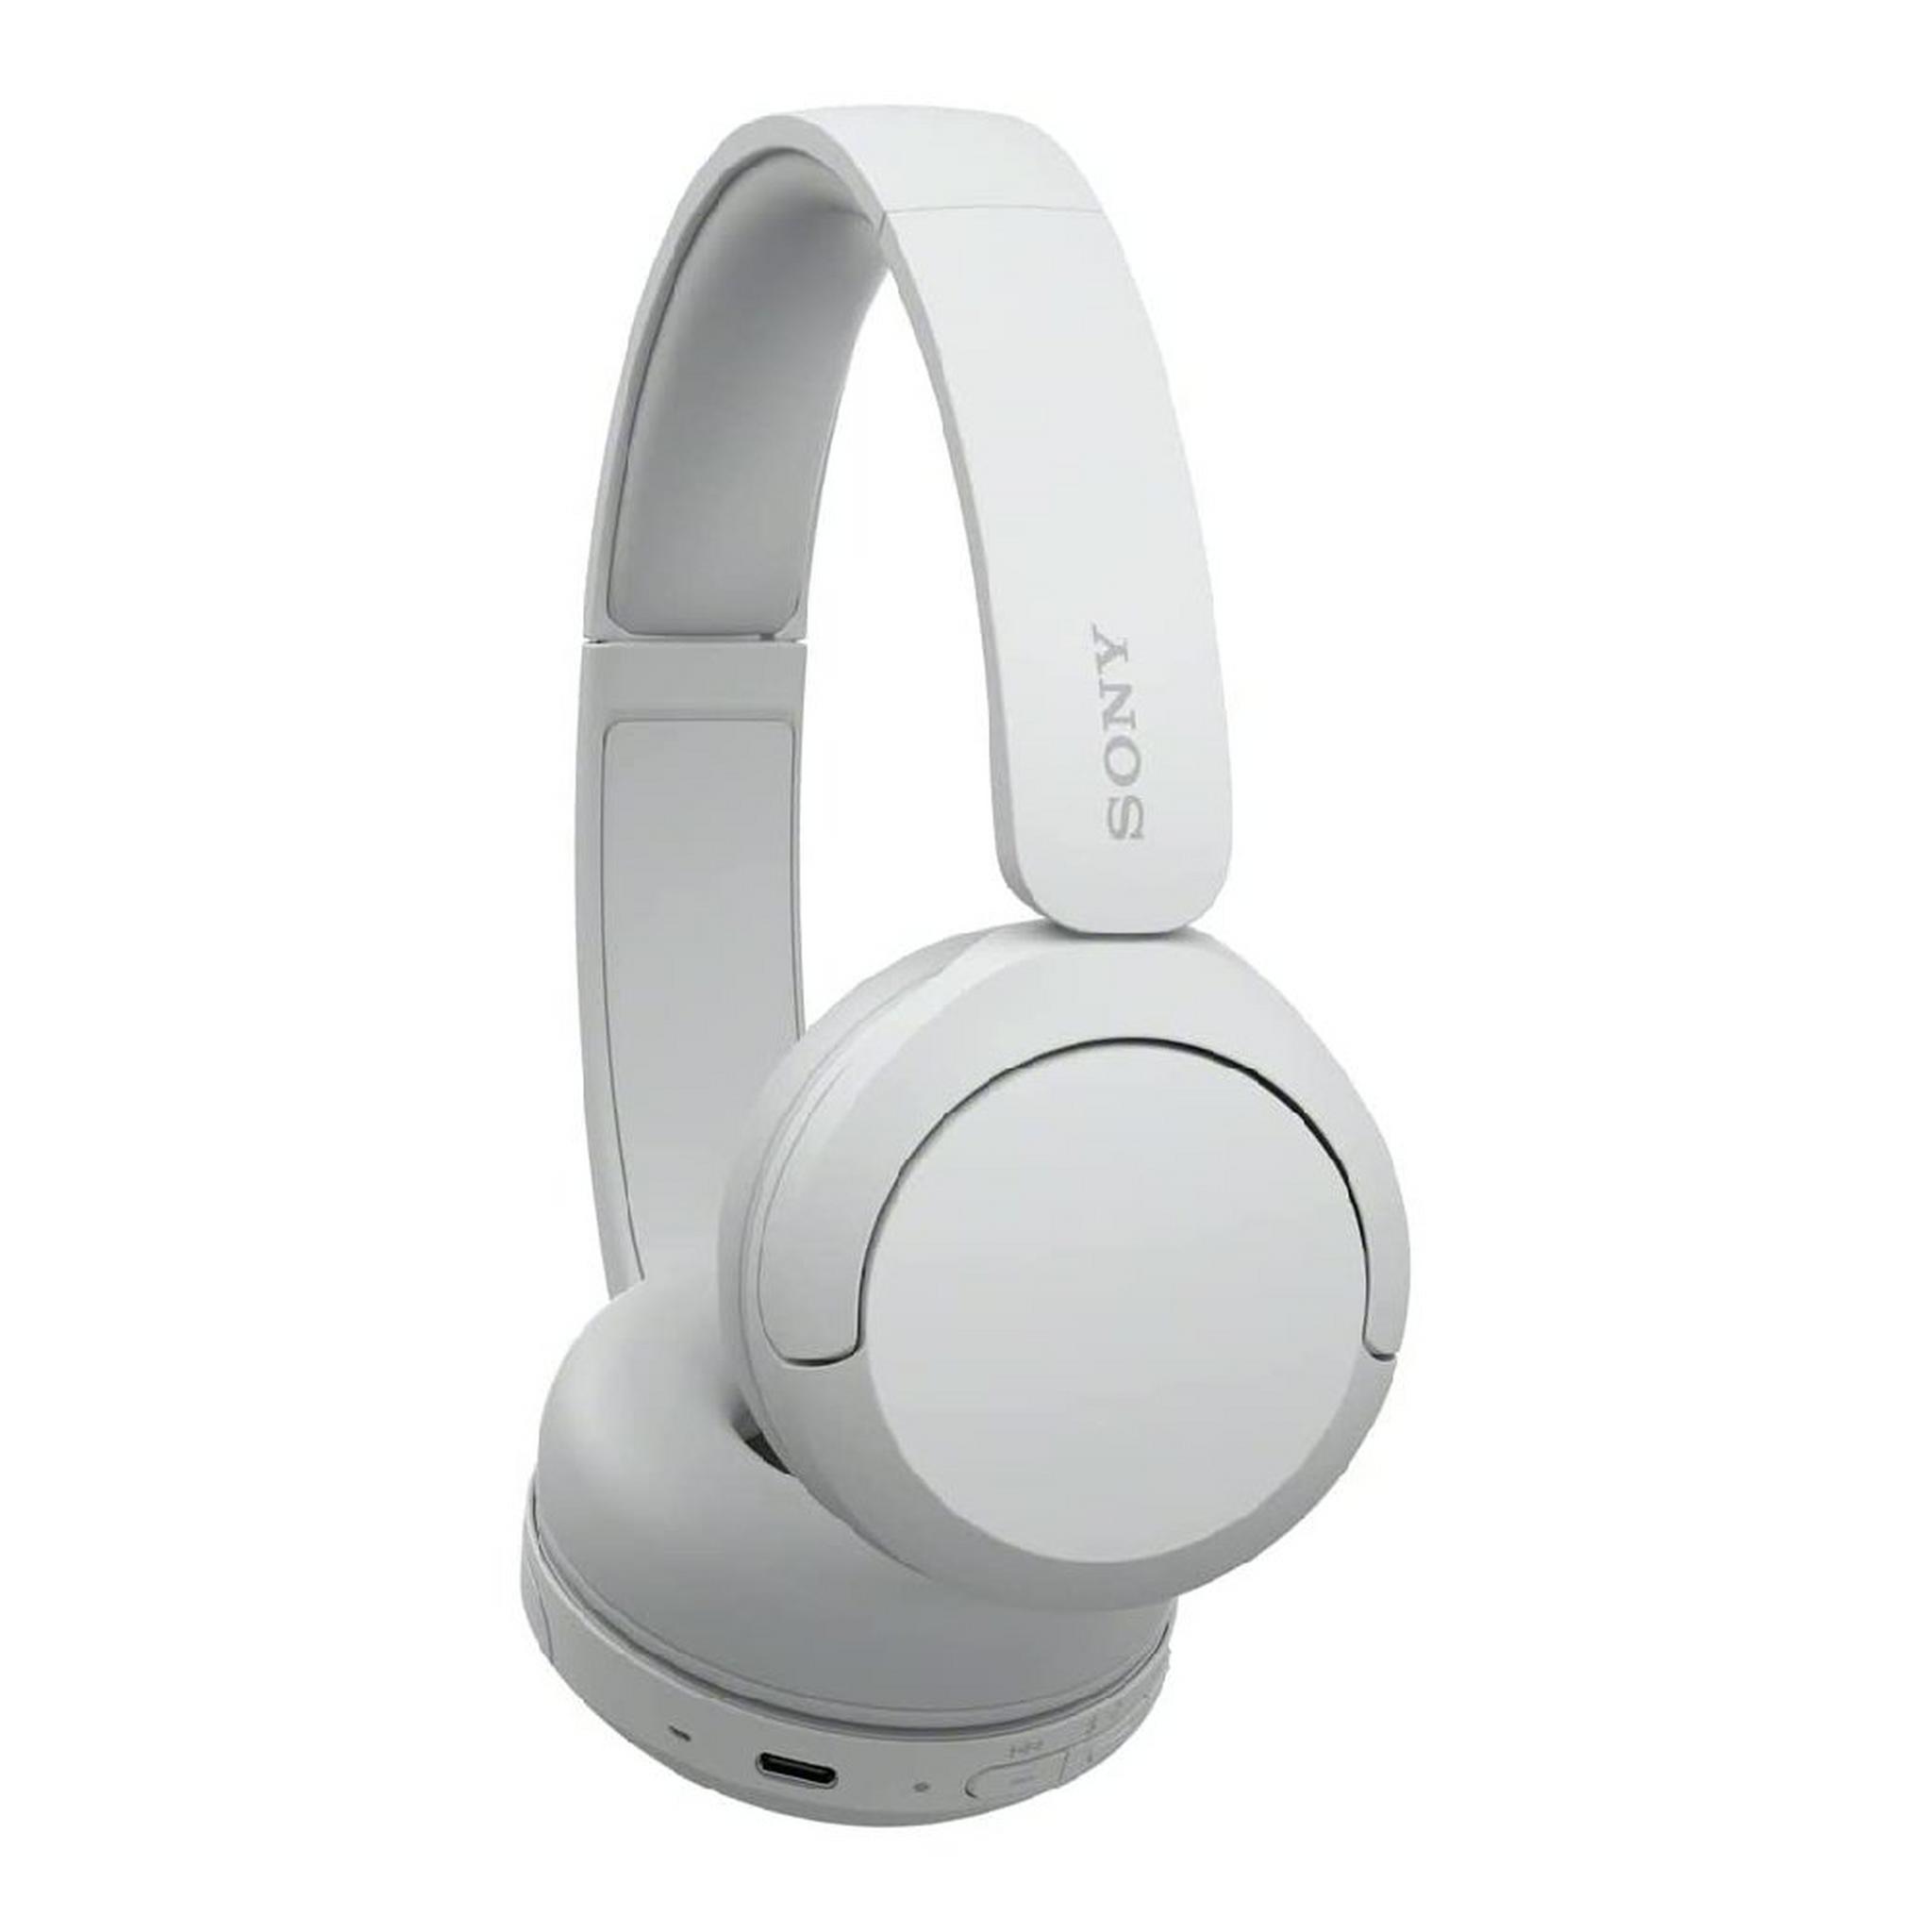 Sony Wireless Headphone with Microphone, WH-CH520/WZE - White